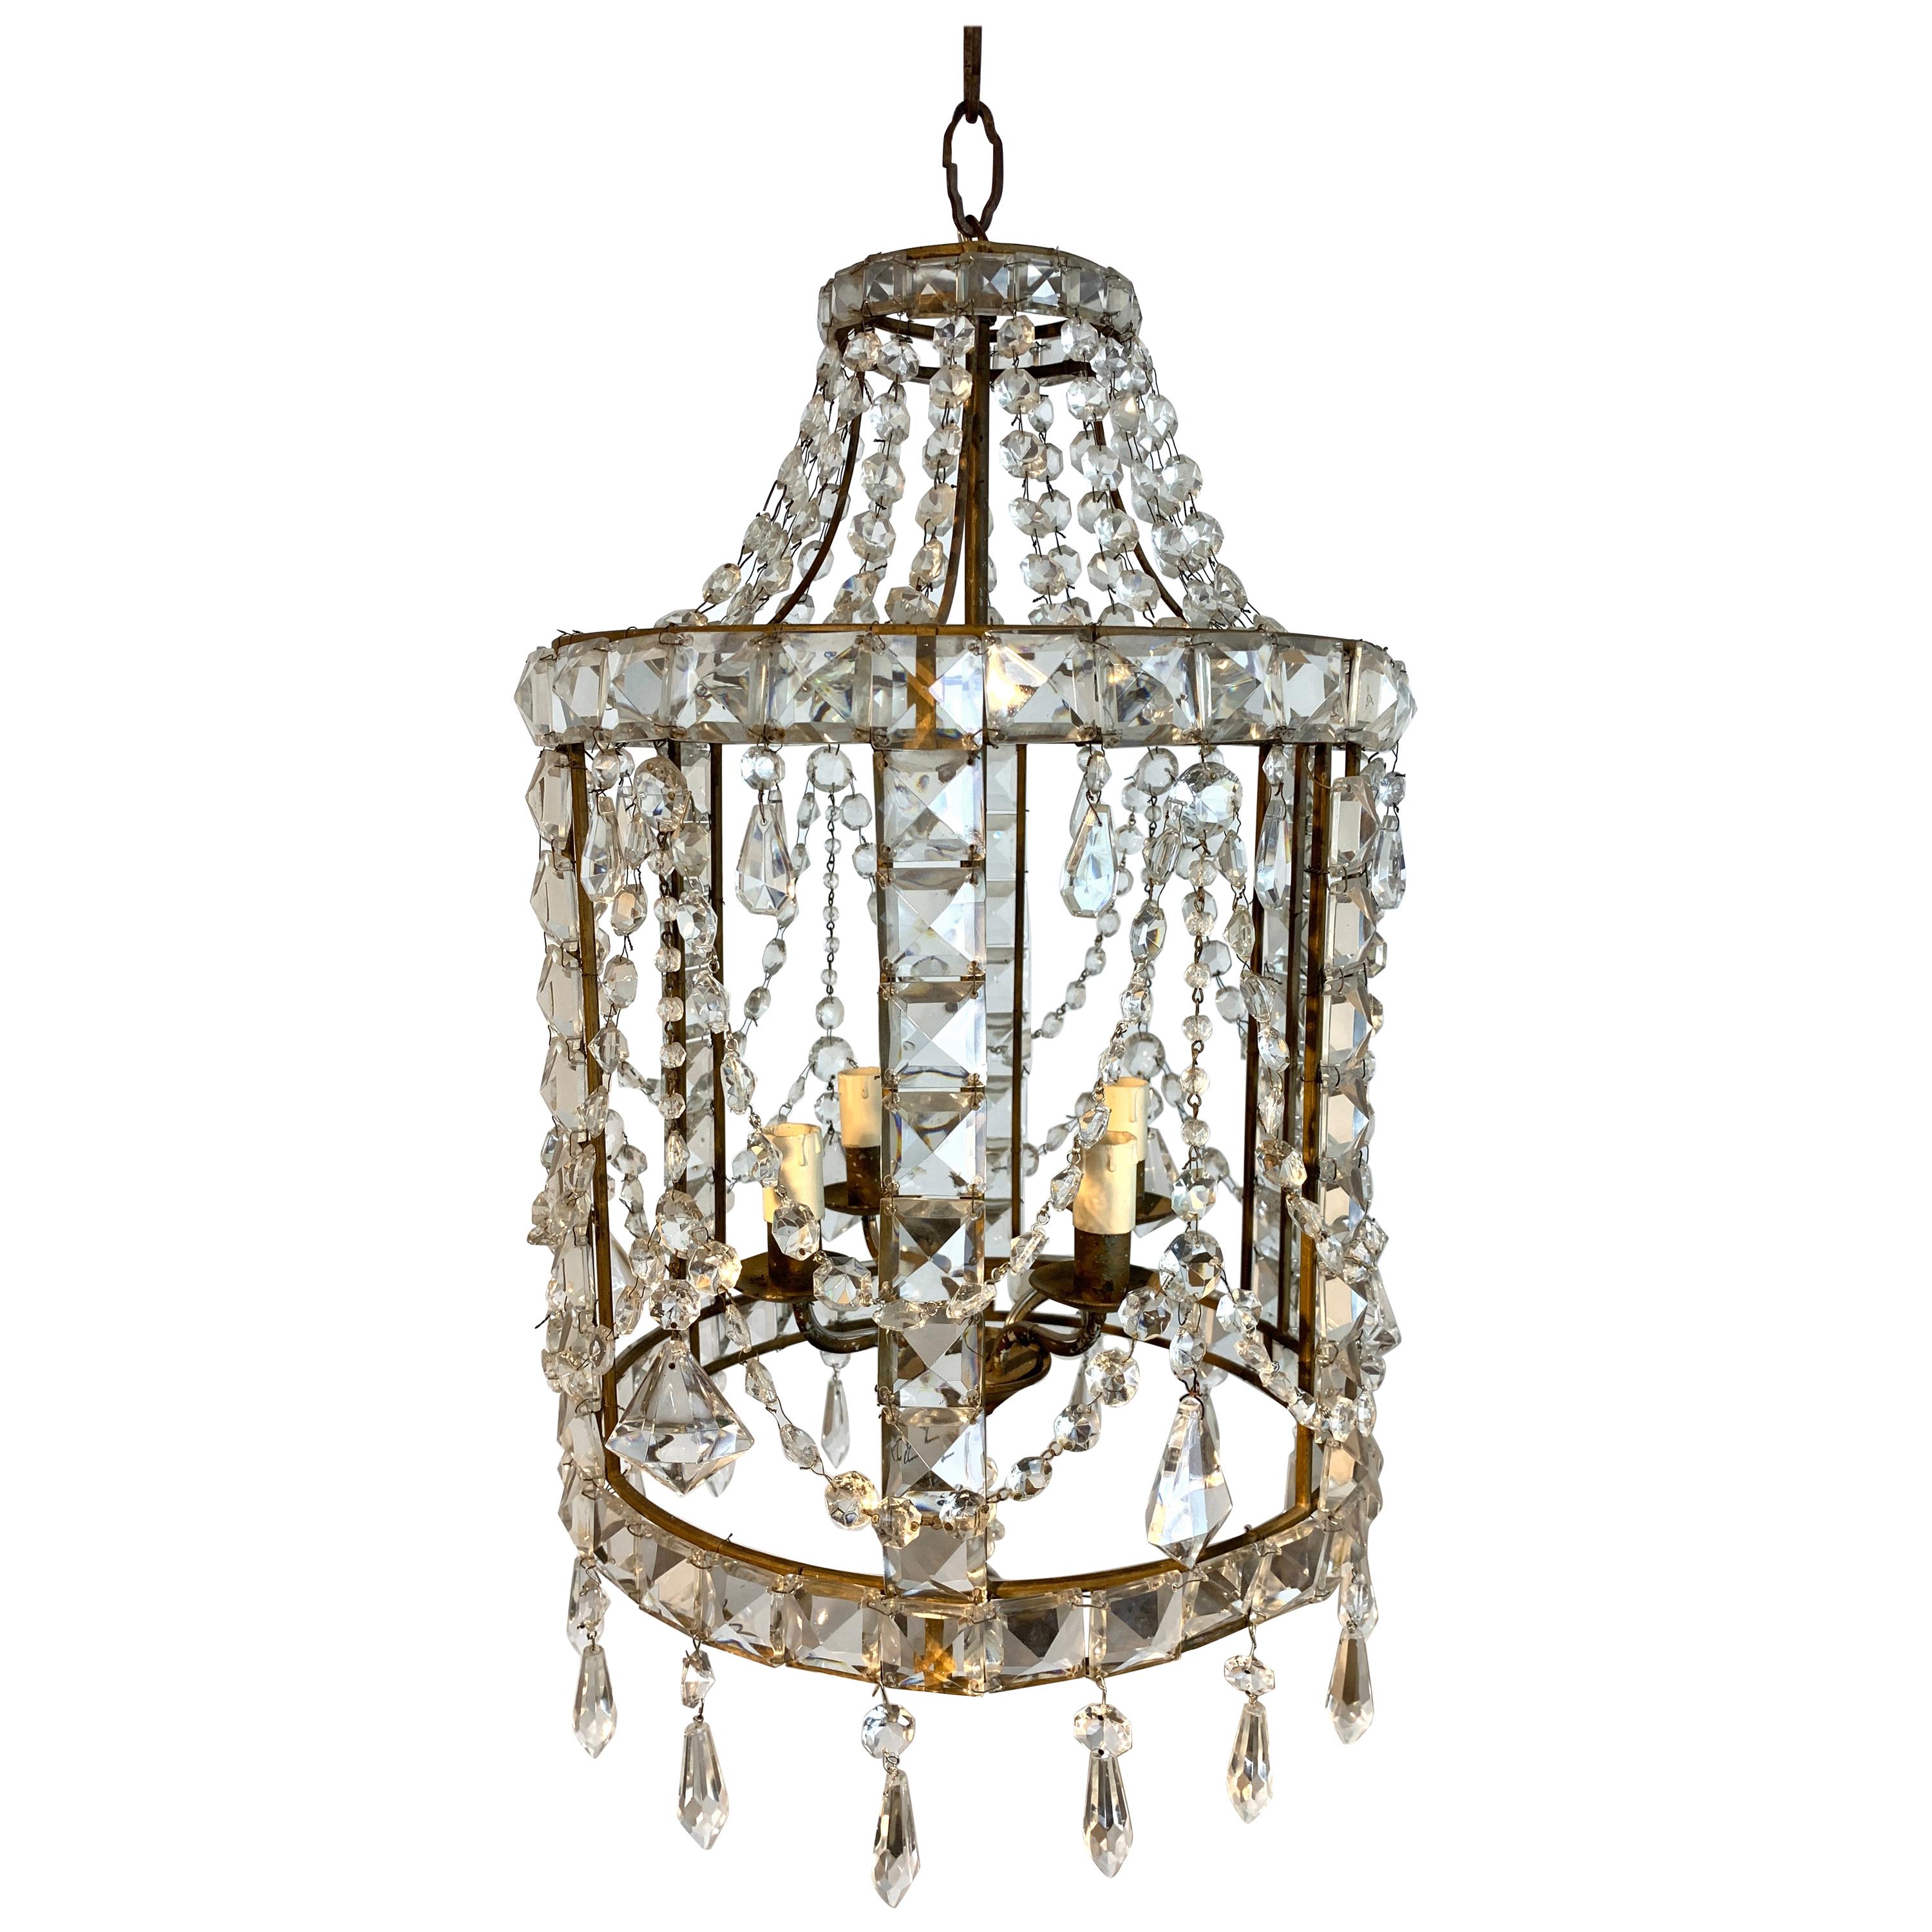 Gorgeous French Neoclassical Crystal Lantern